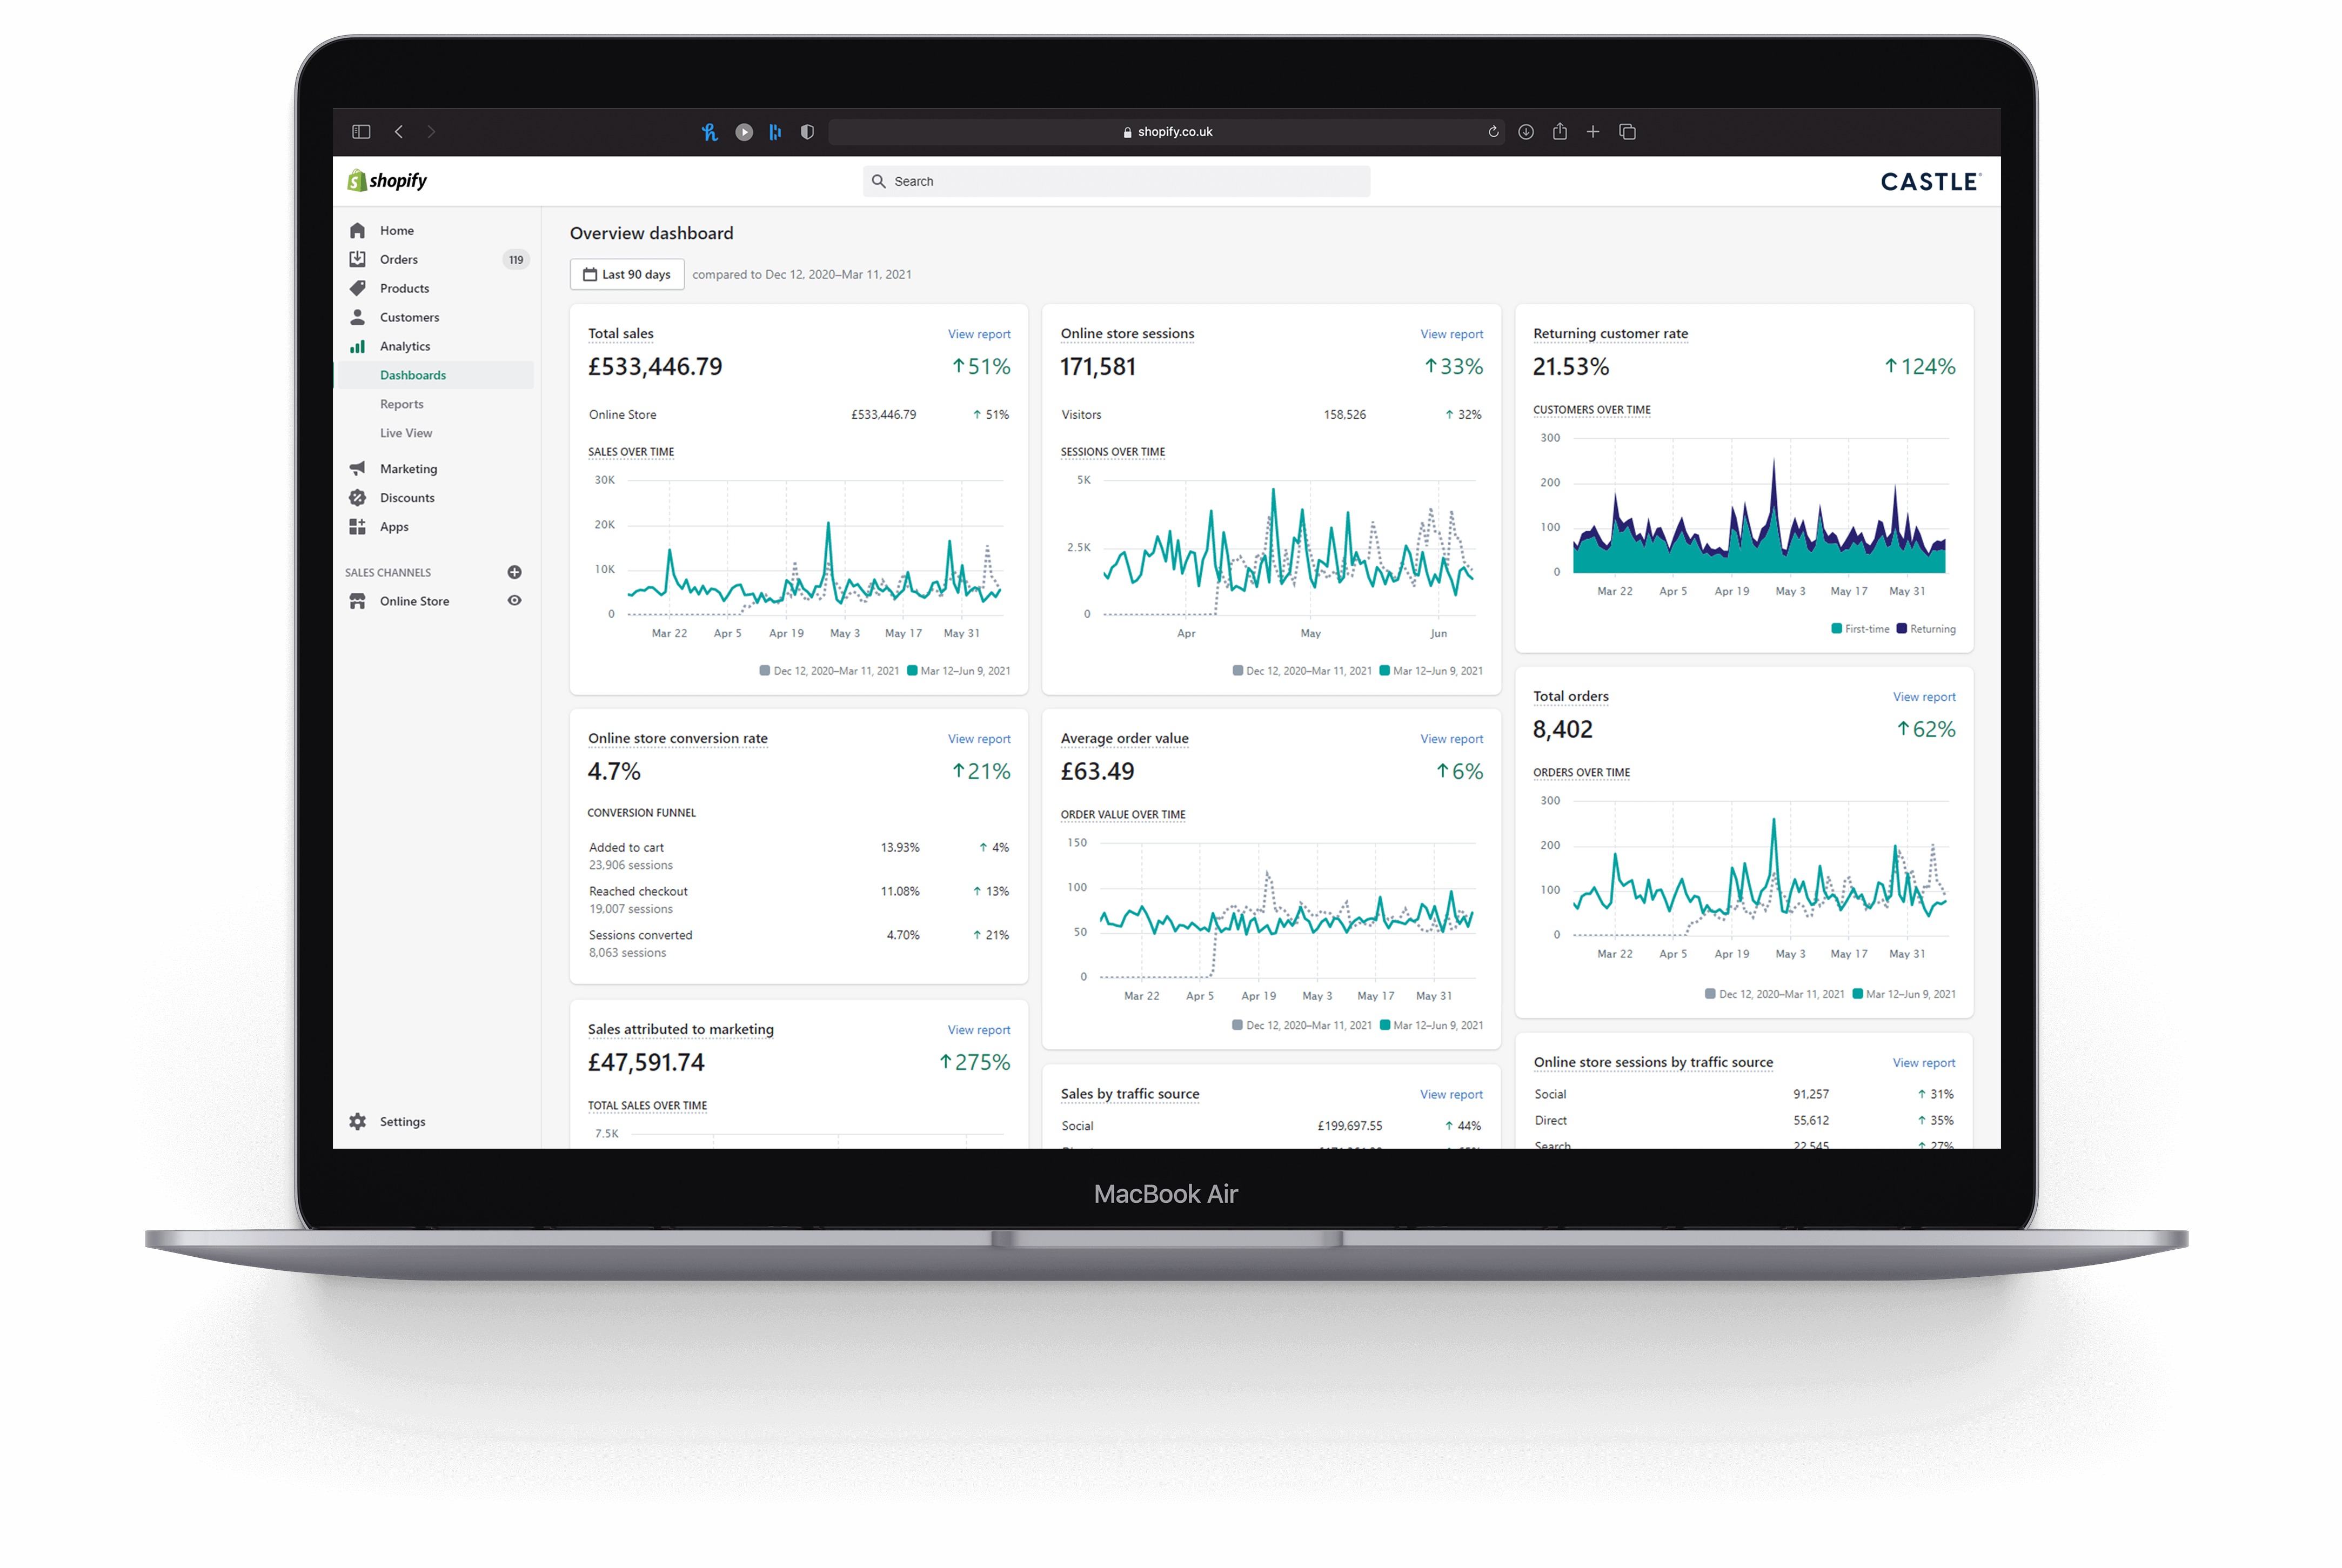 A Macbook Air featuring a screenshot of the Analytics Dashboard Overview for Shopify Partners.